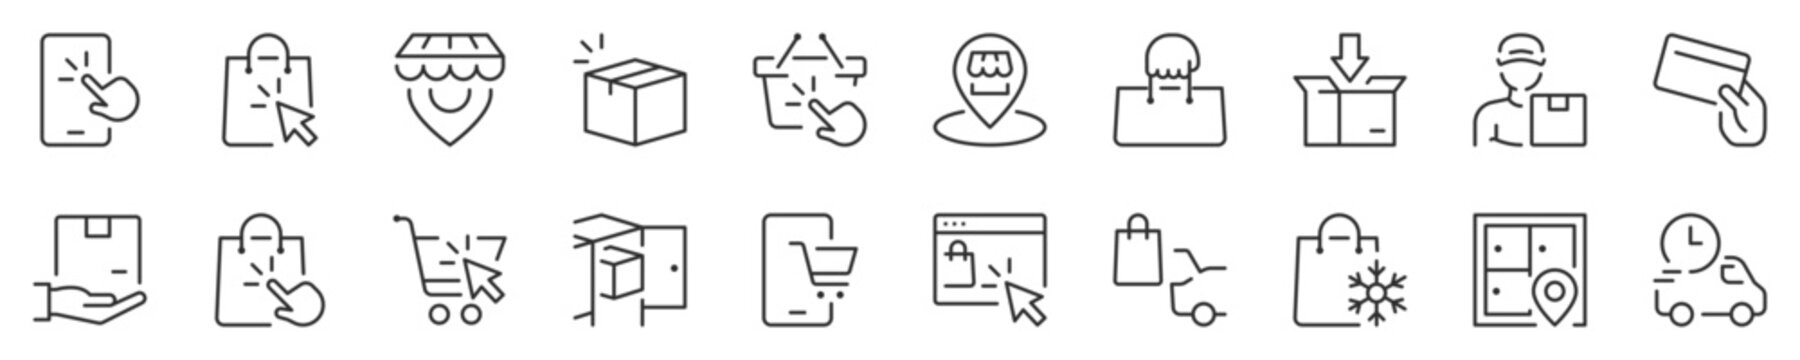 Line icons about shopping online, click and collect, thin line icon set. Symbol collection in transparent background. Editable vector stroke. 512x512 Pixel Perfect.